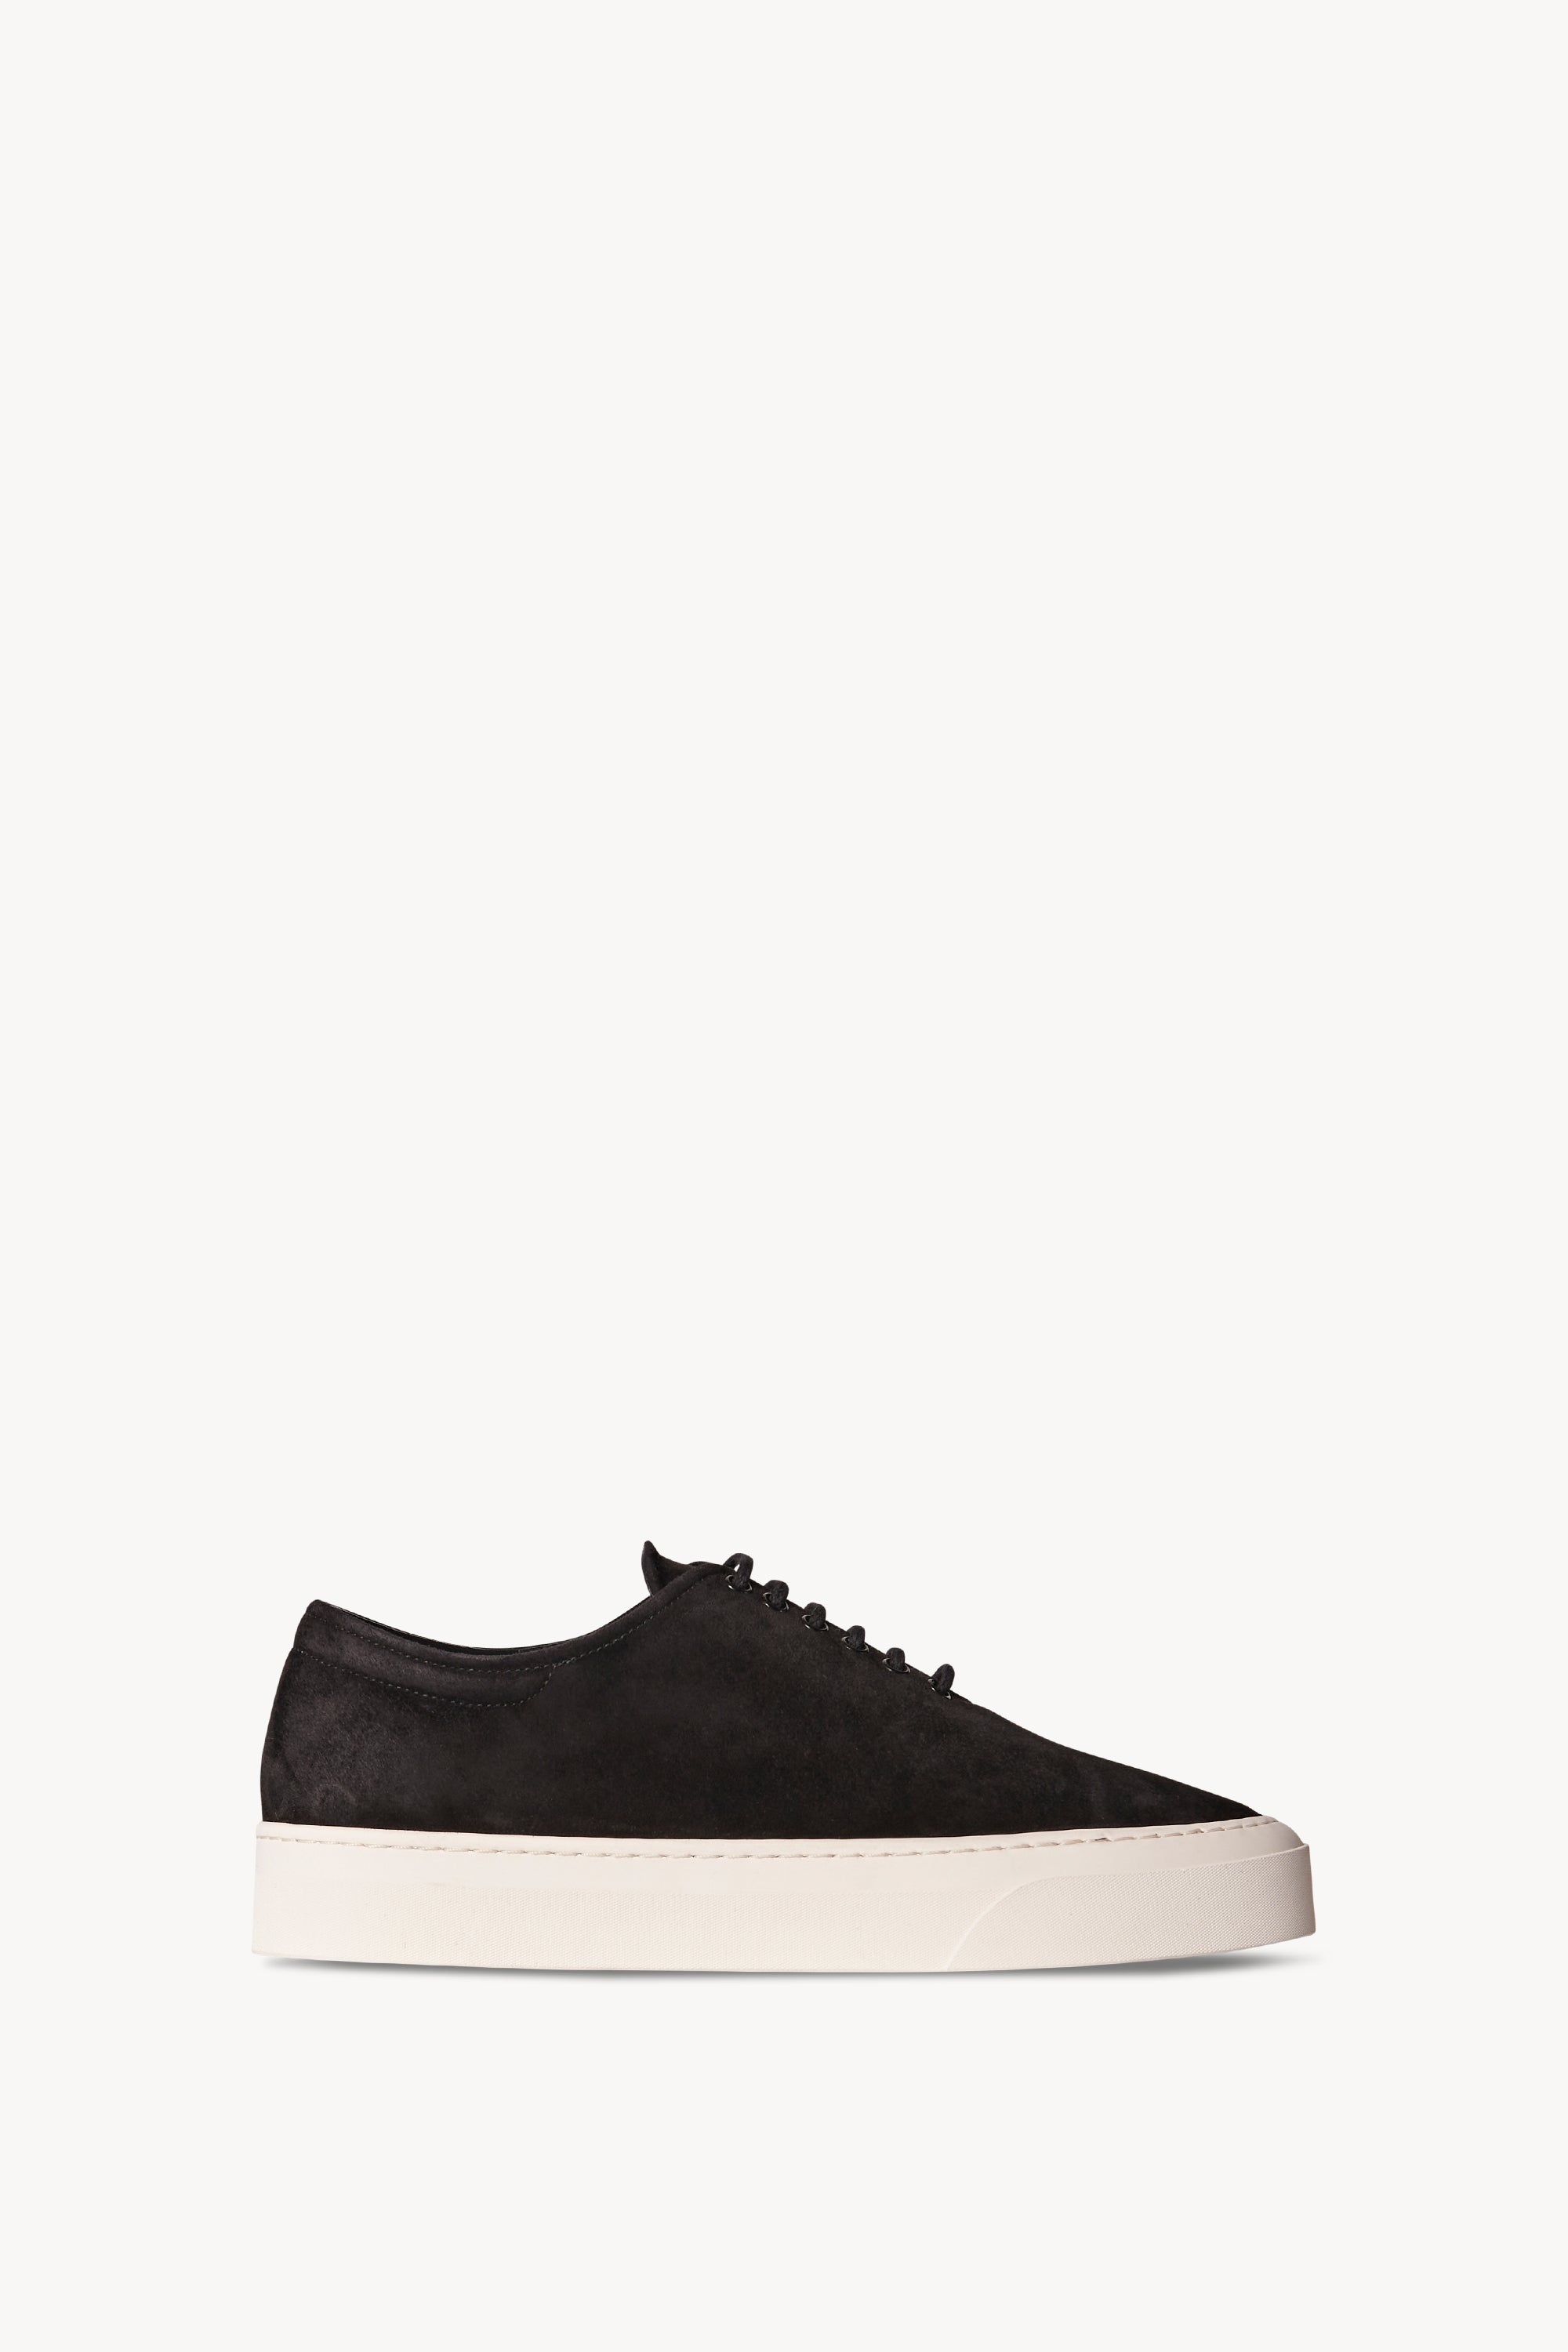 Marie H Lace-Up Sneaker in Suede - 1